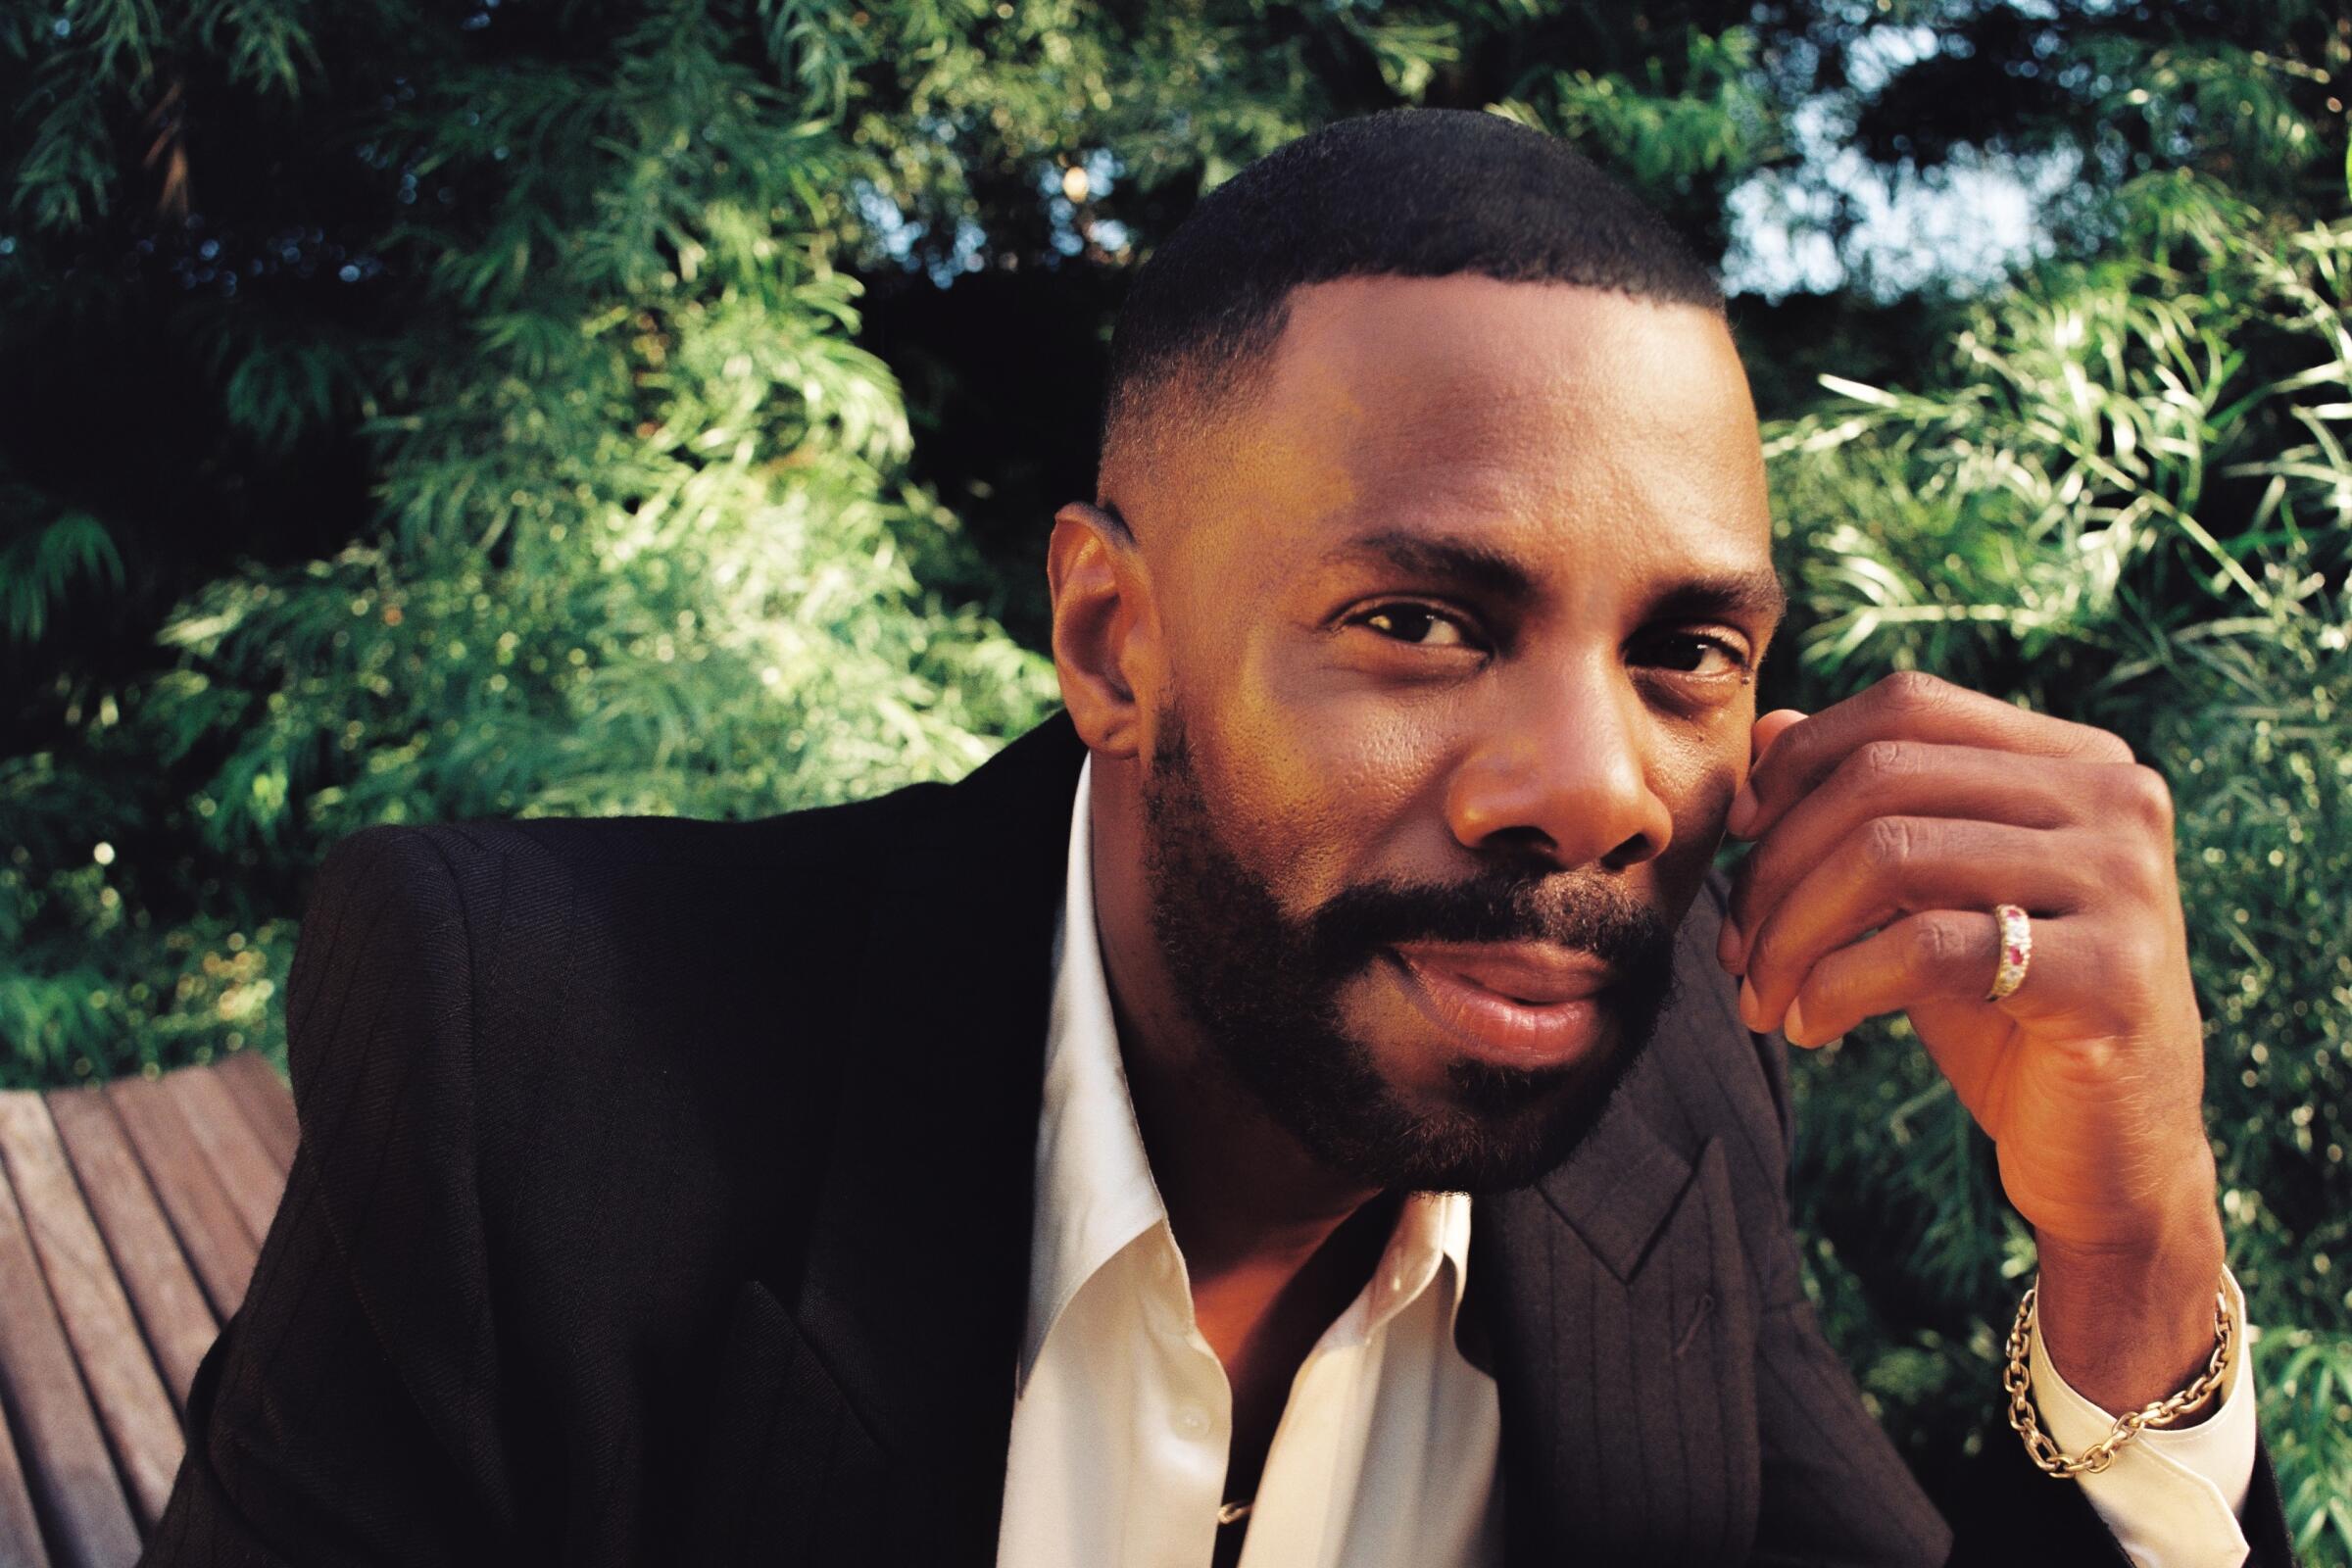 Colman Domingo wears a sport coat and button-up shirt for a portrait outside.